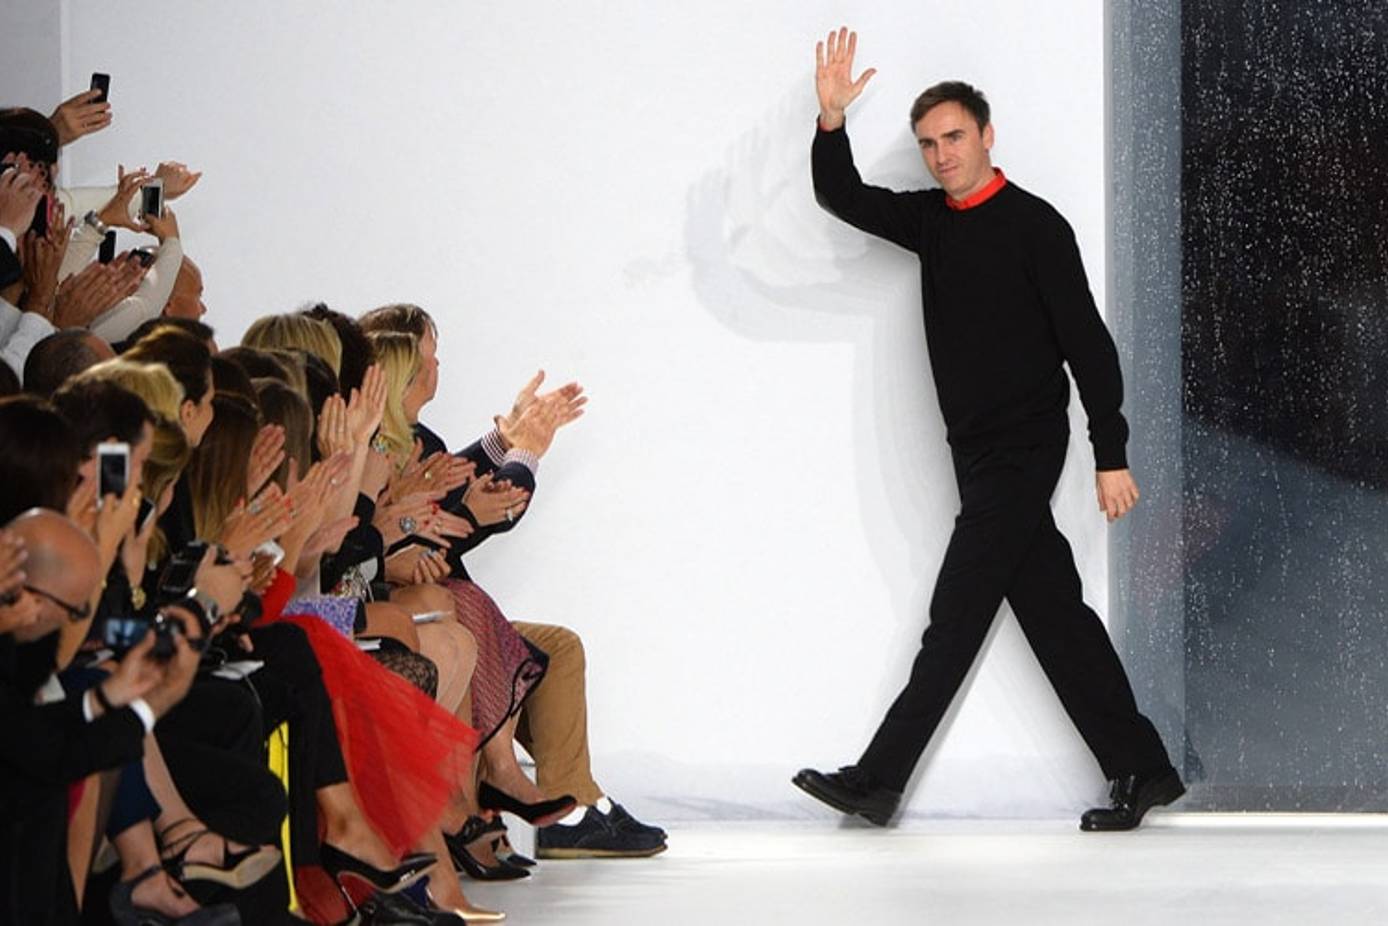 Raf Simons Debuts at Christian Dior With Couture Collection